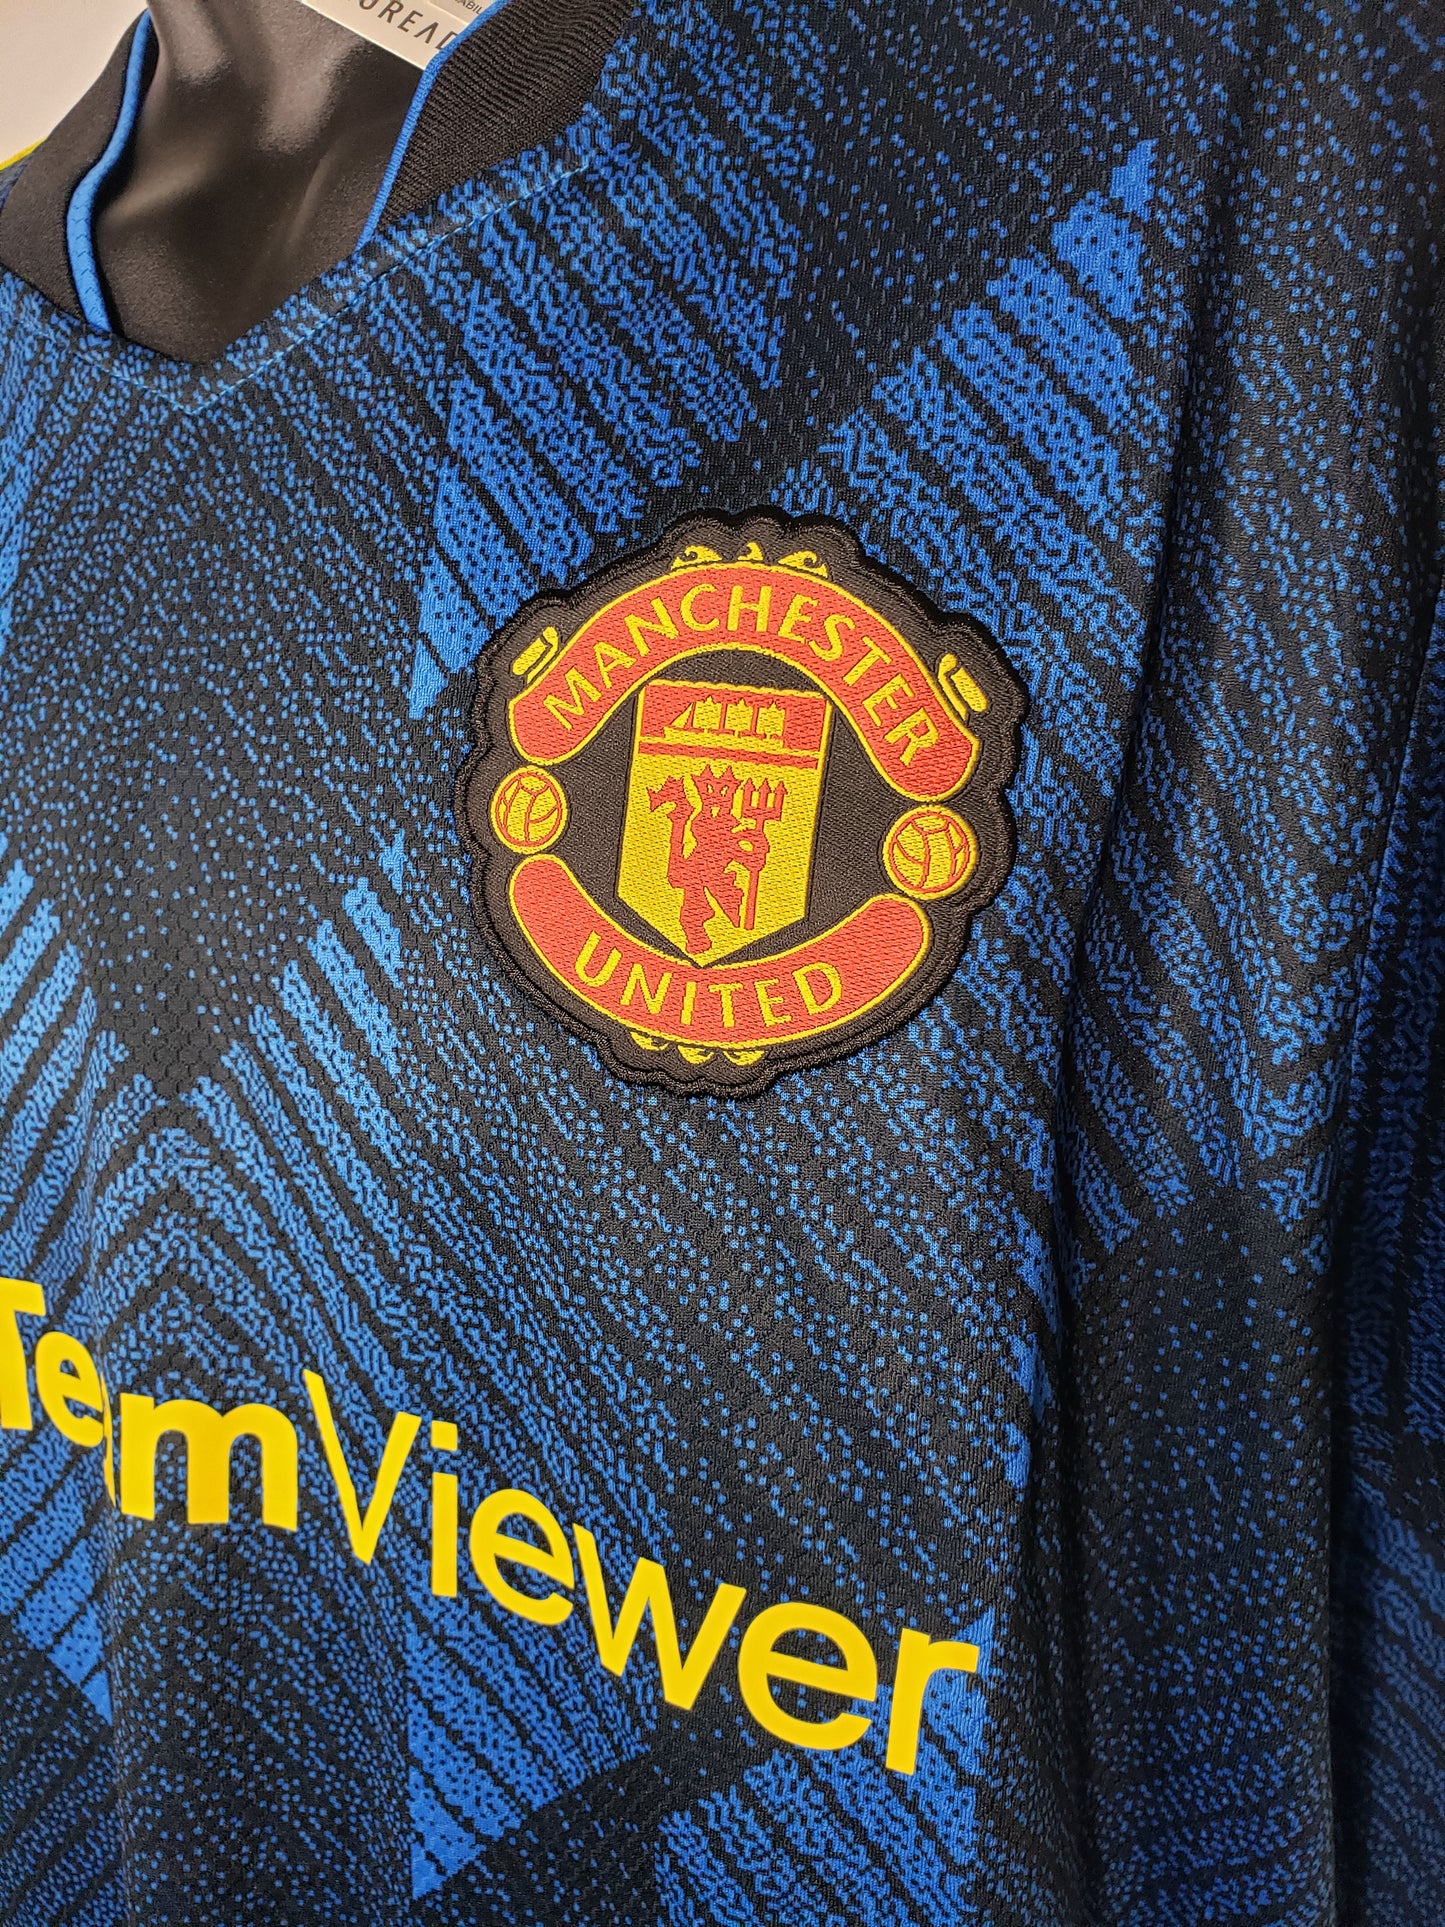 Manchester United 3RD Kit Replica Jersey